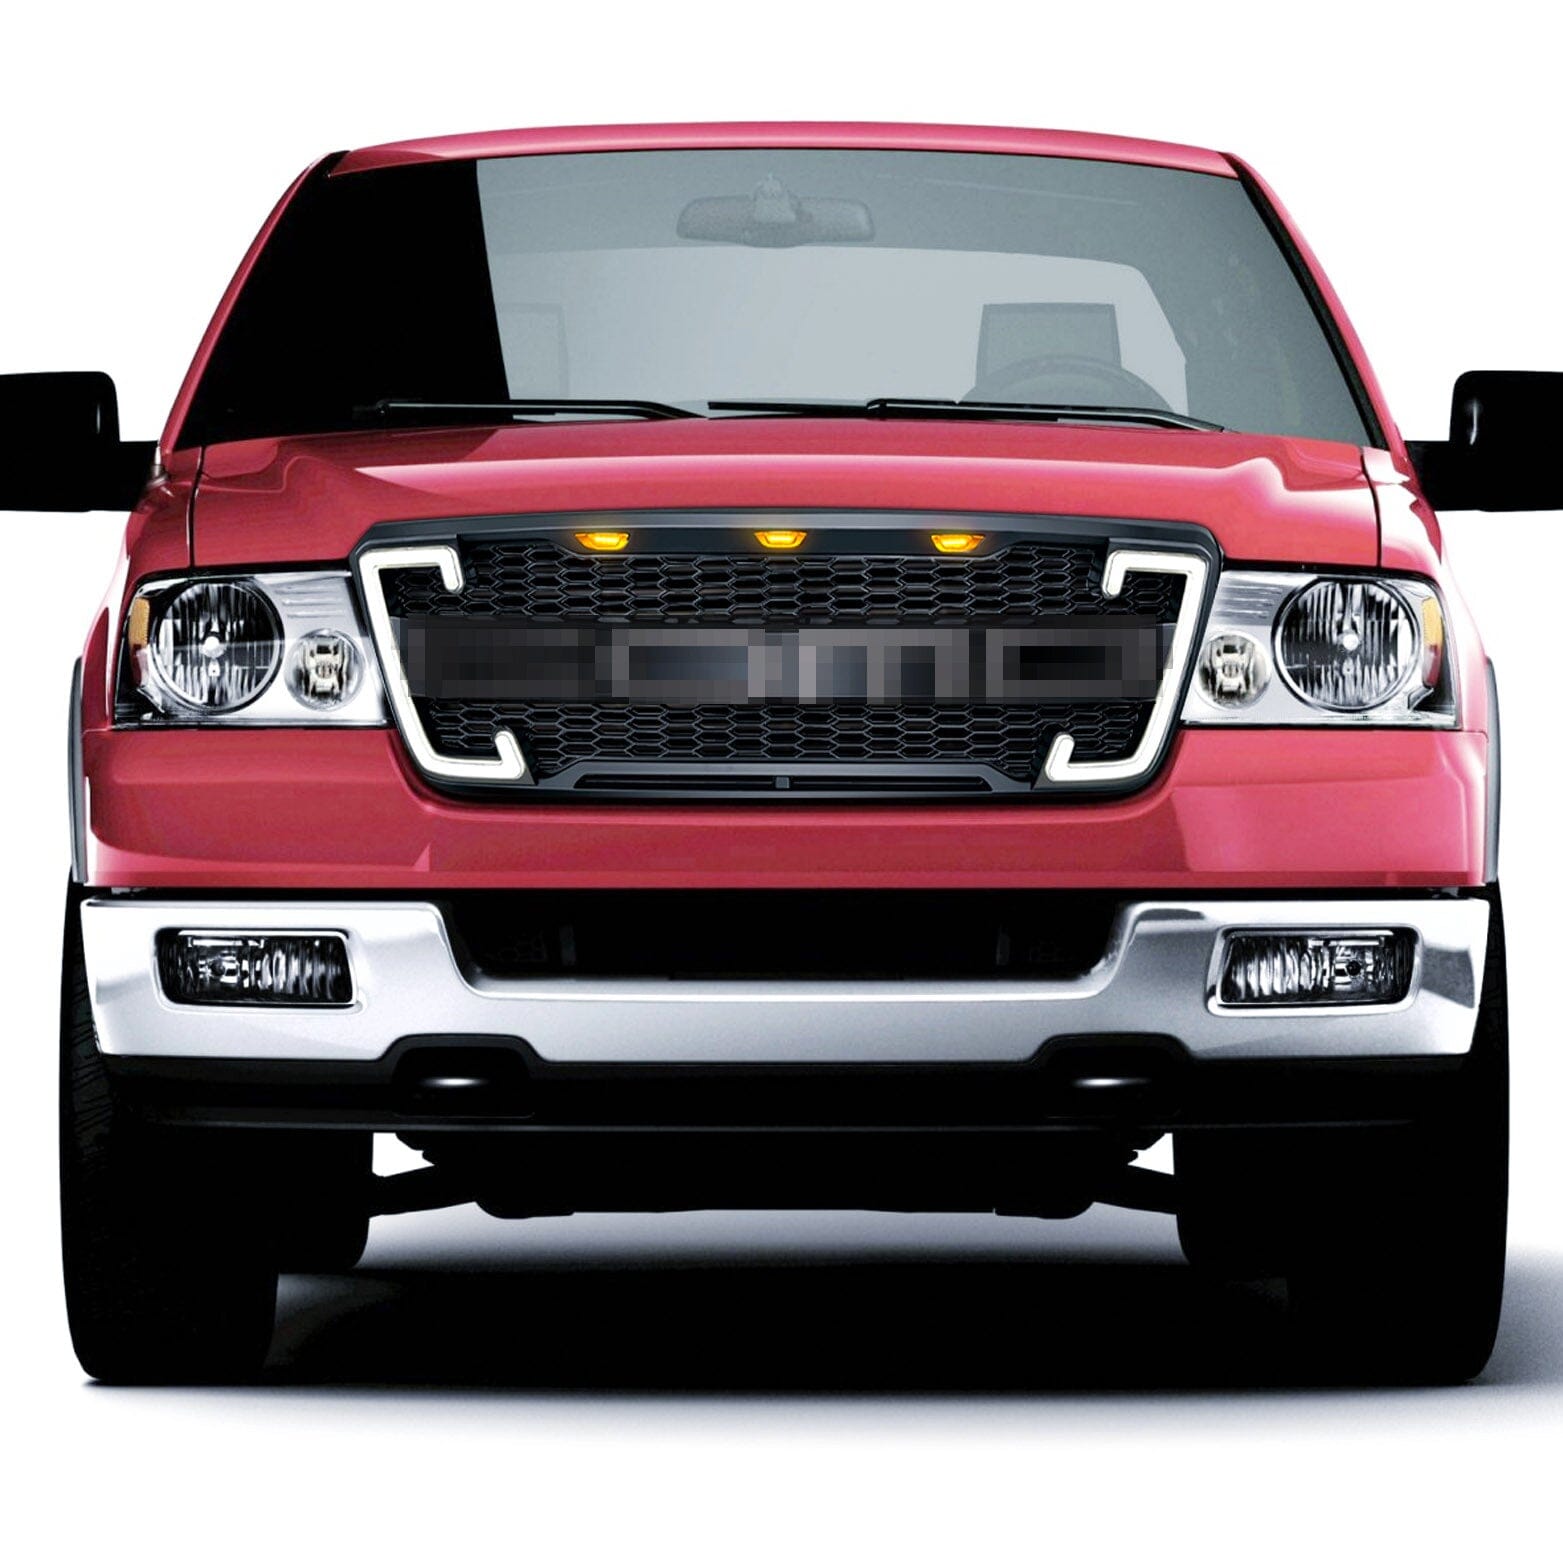 Raptor Style Mesh Grille W/DRL FR & Turn Signal Lights For 2004-2008 Ford F150| Amoffroad